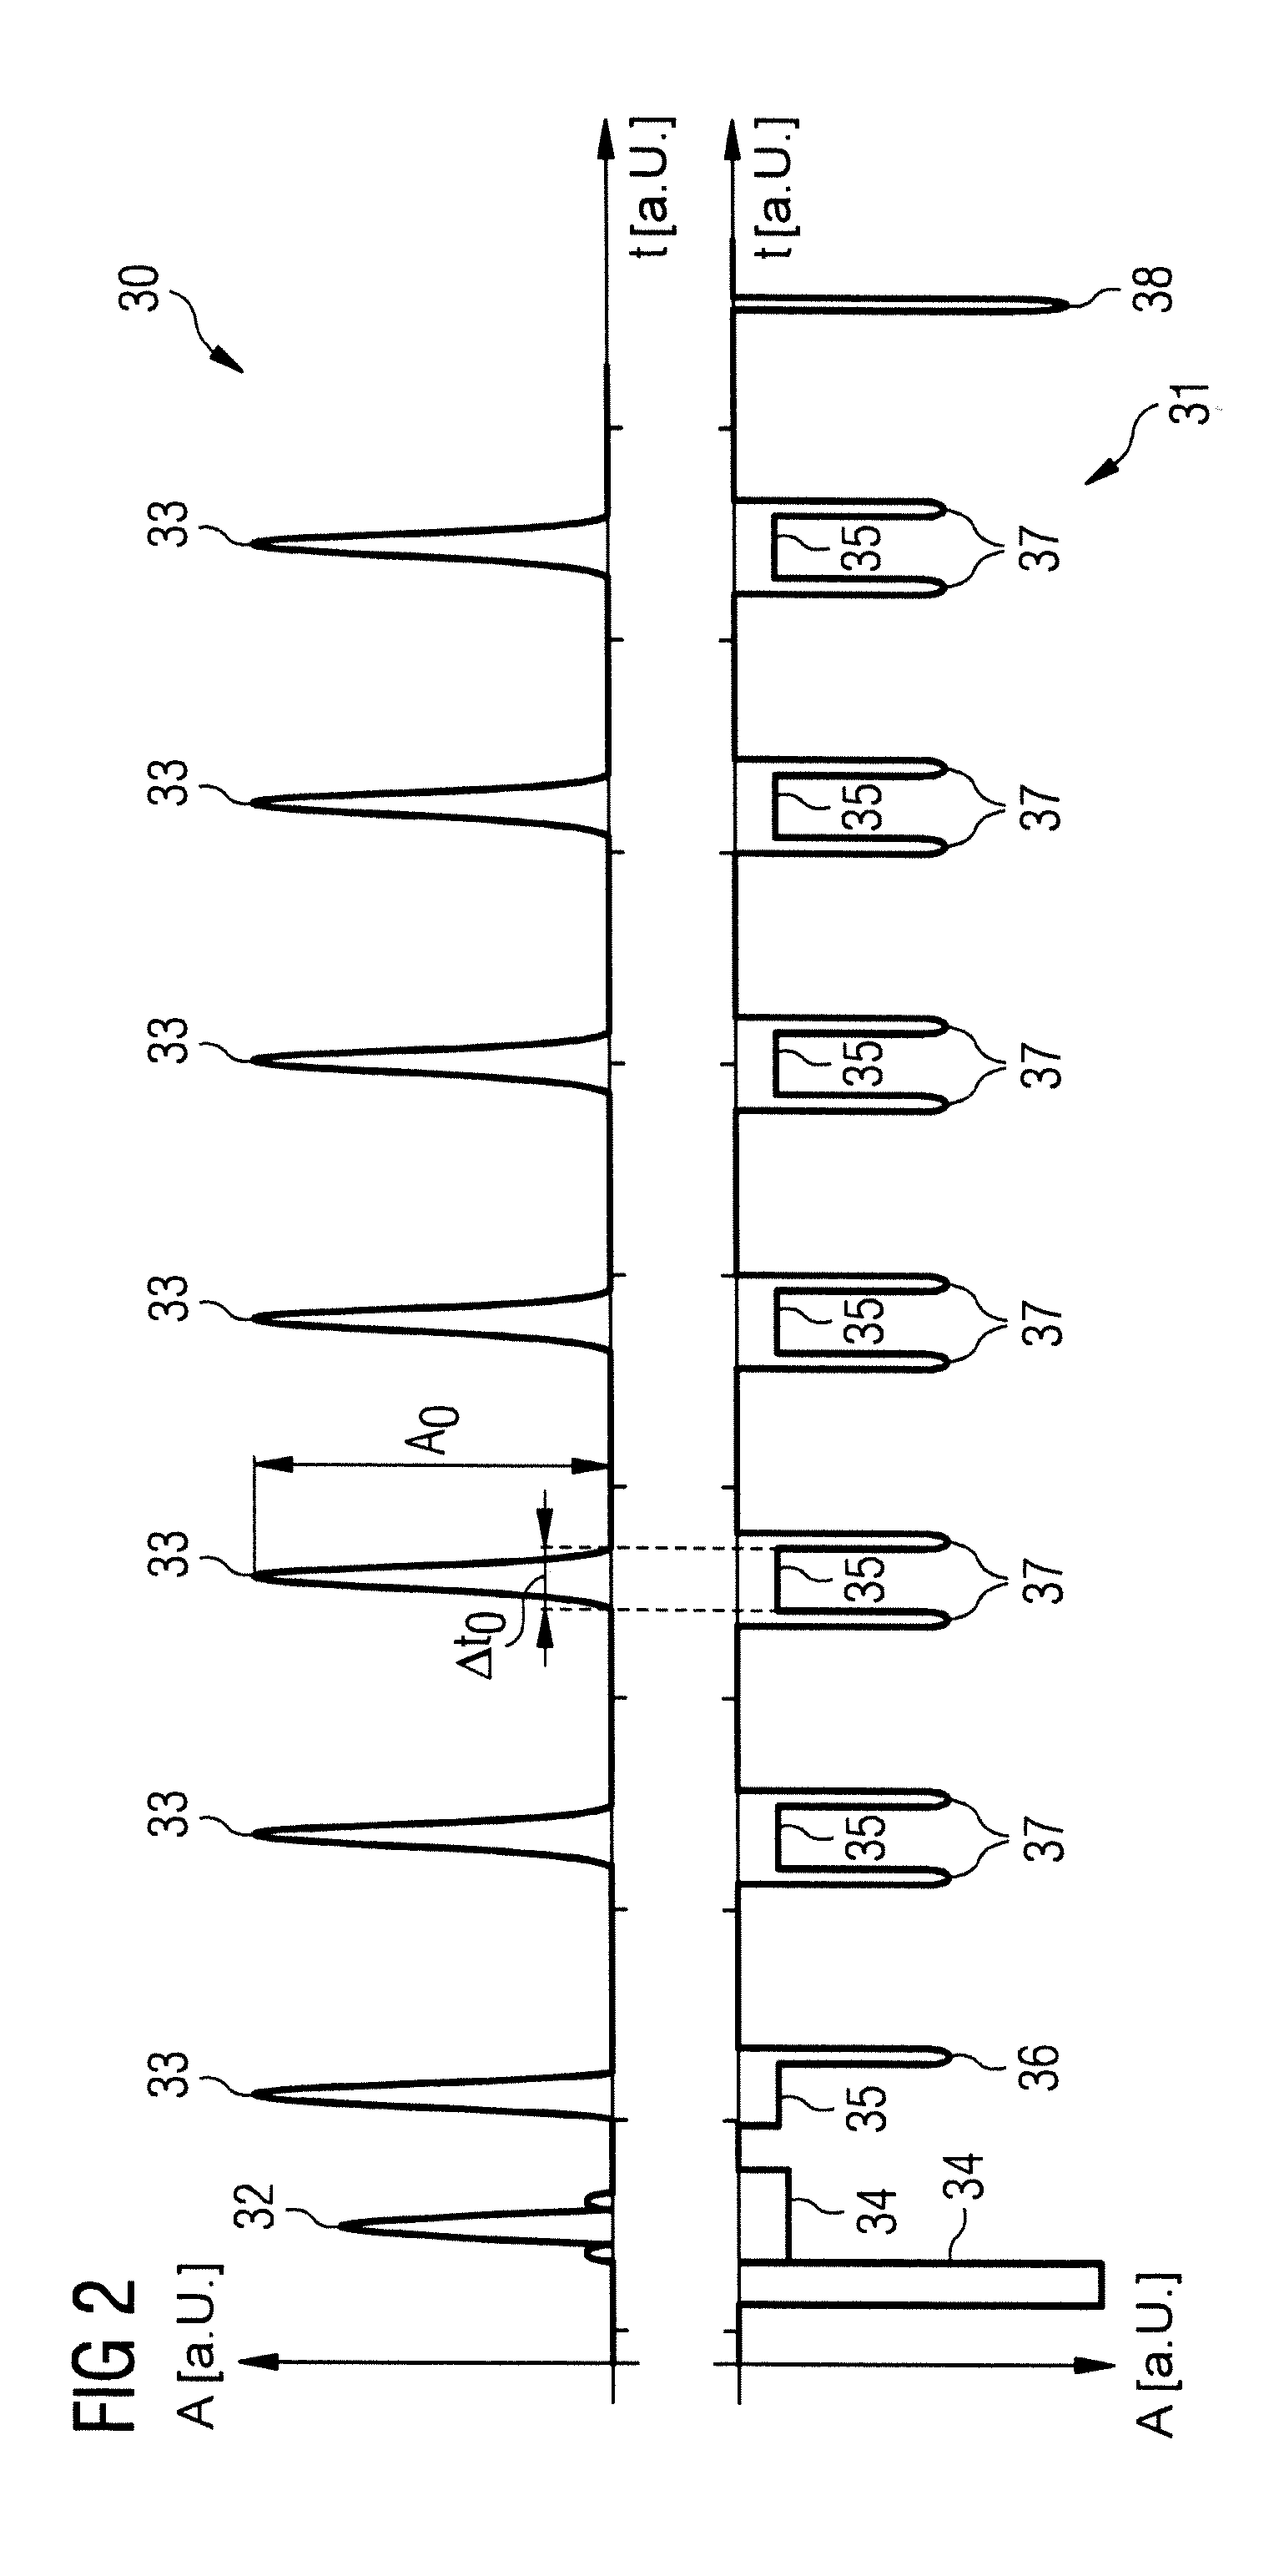 Method and apparatus for optimization of a pulse sequence for a magnetic resonance system